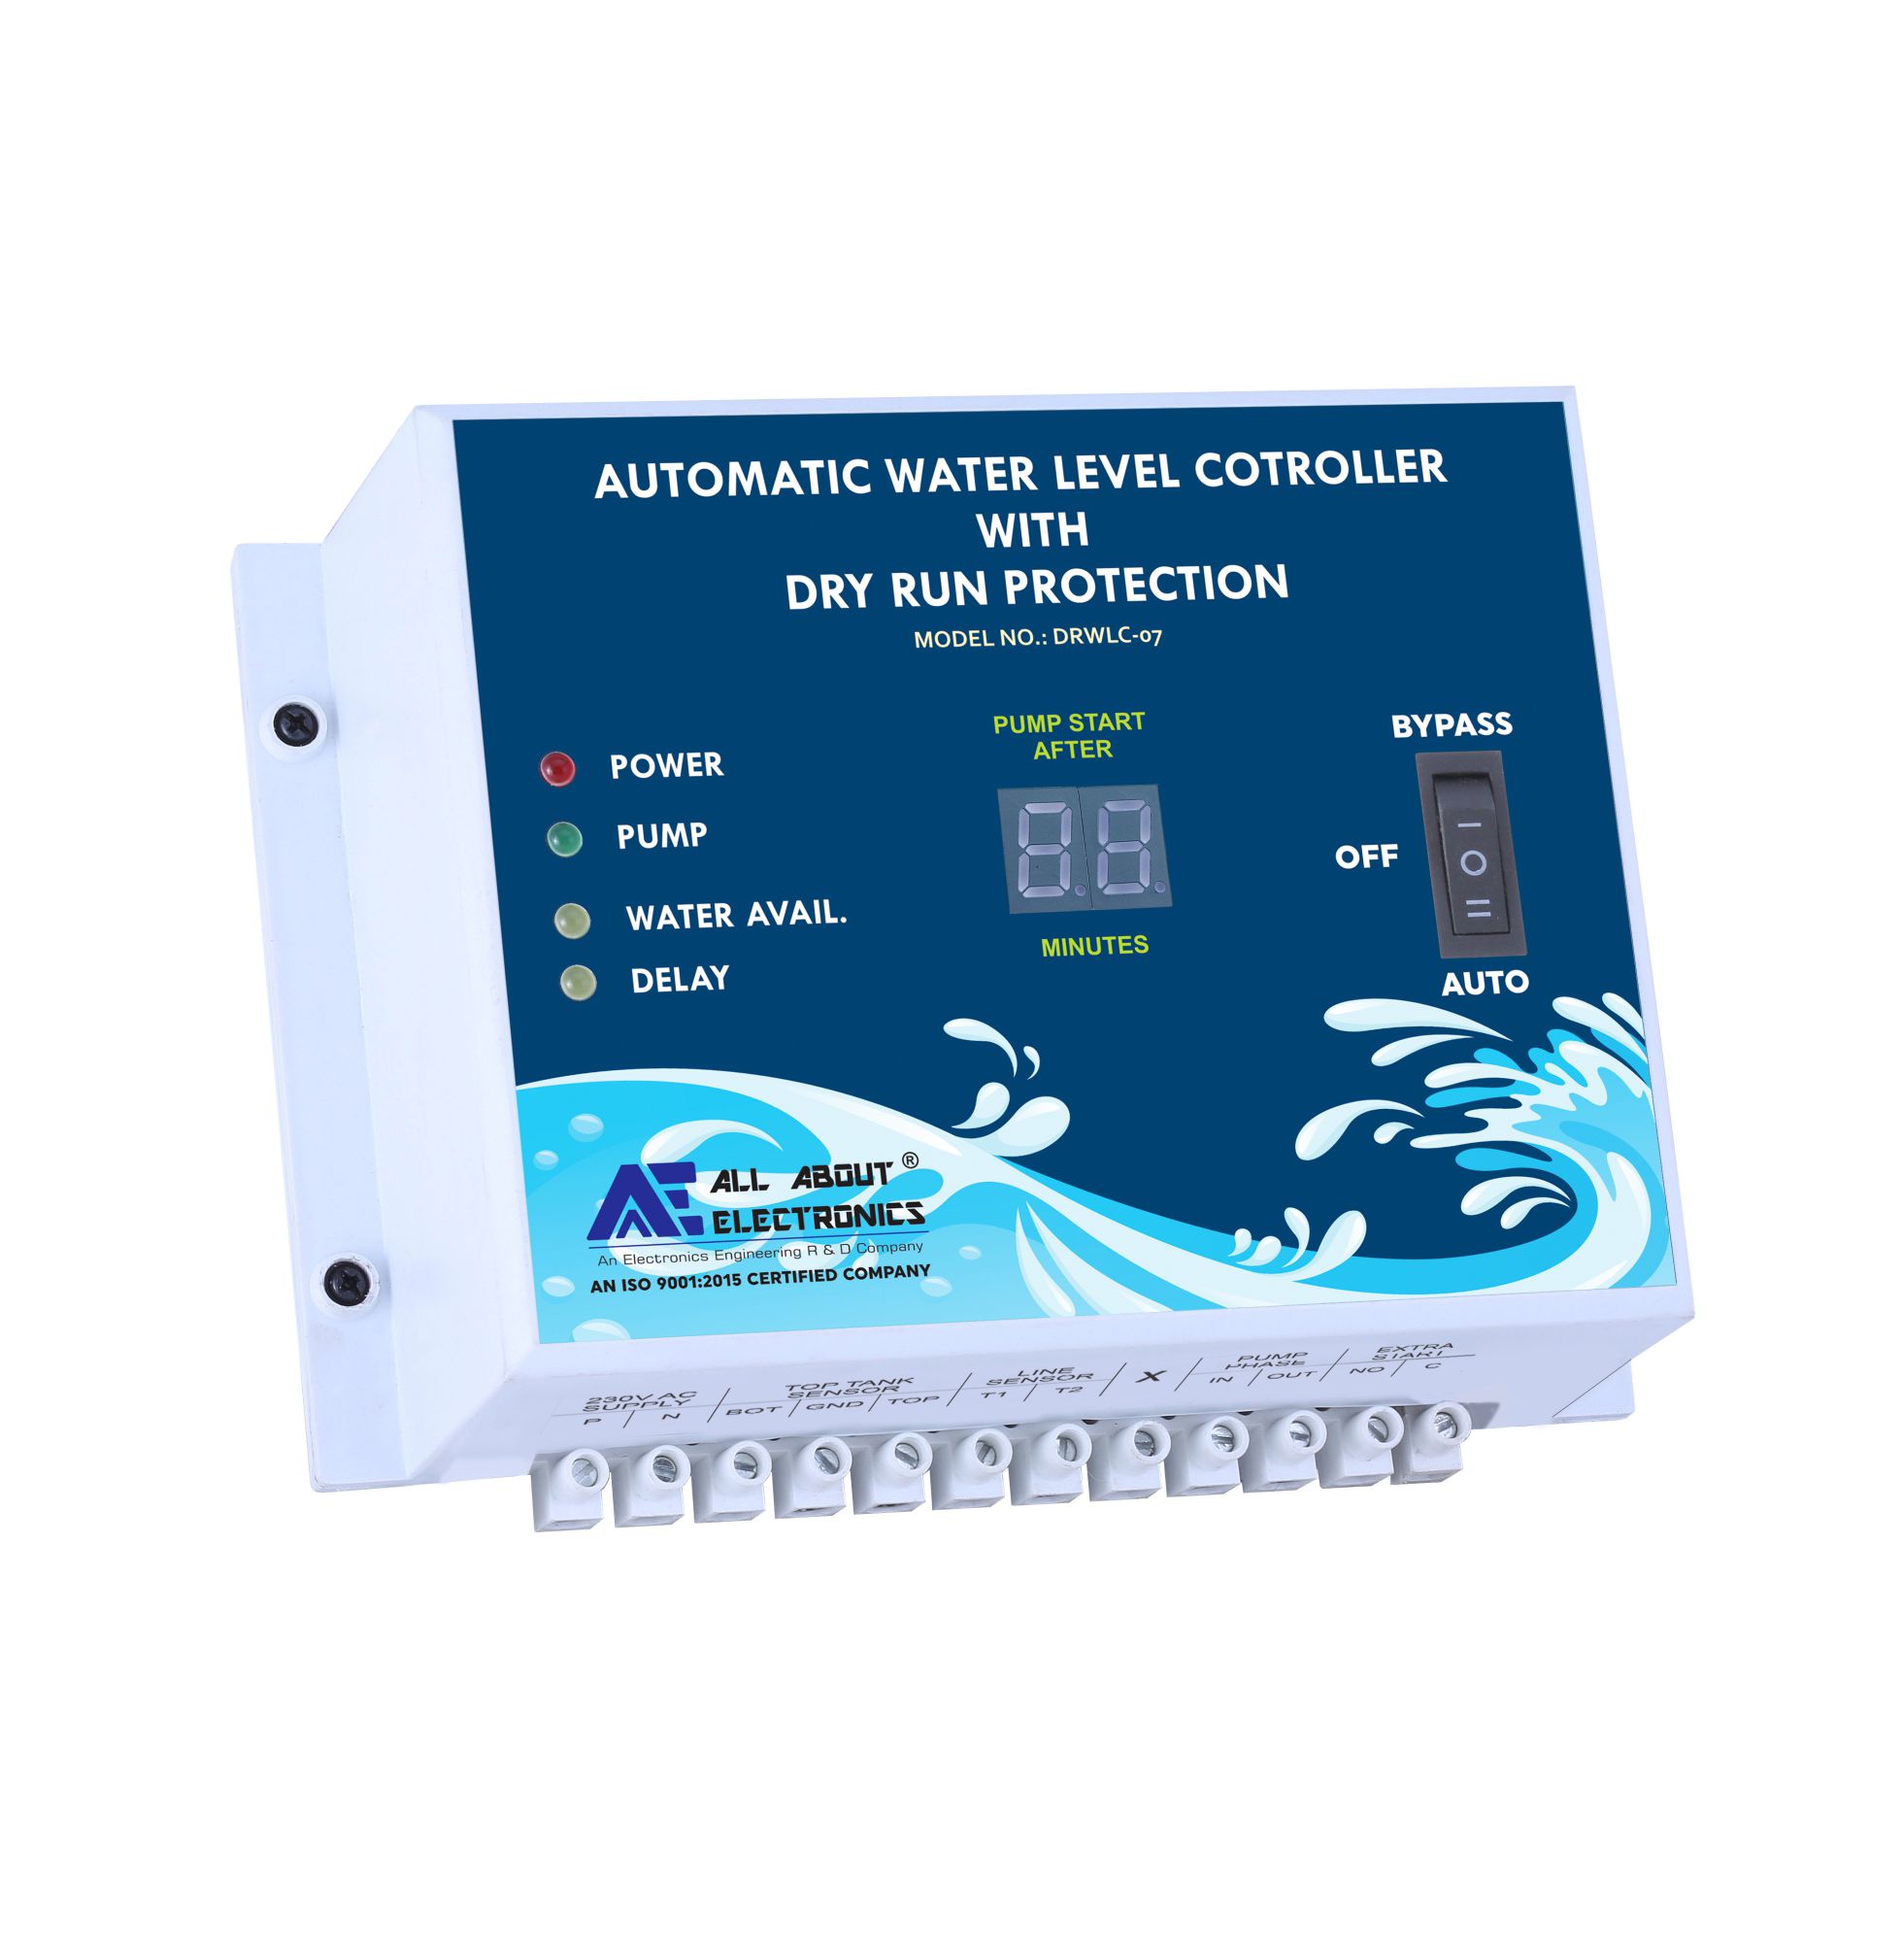 Automatic Water Level Controller with Dryrun Protection